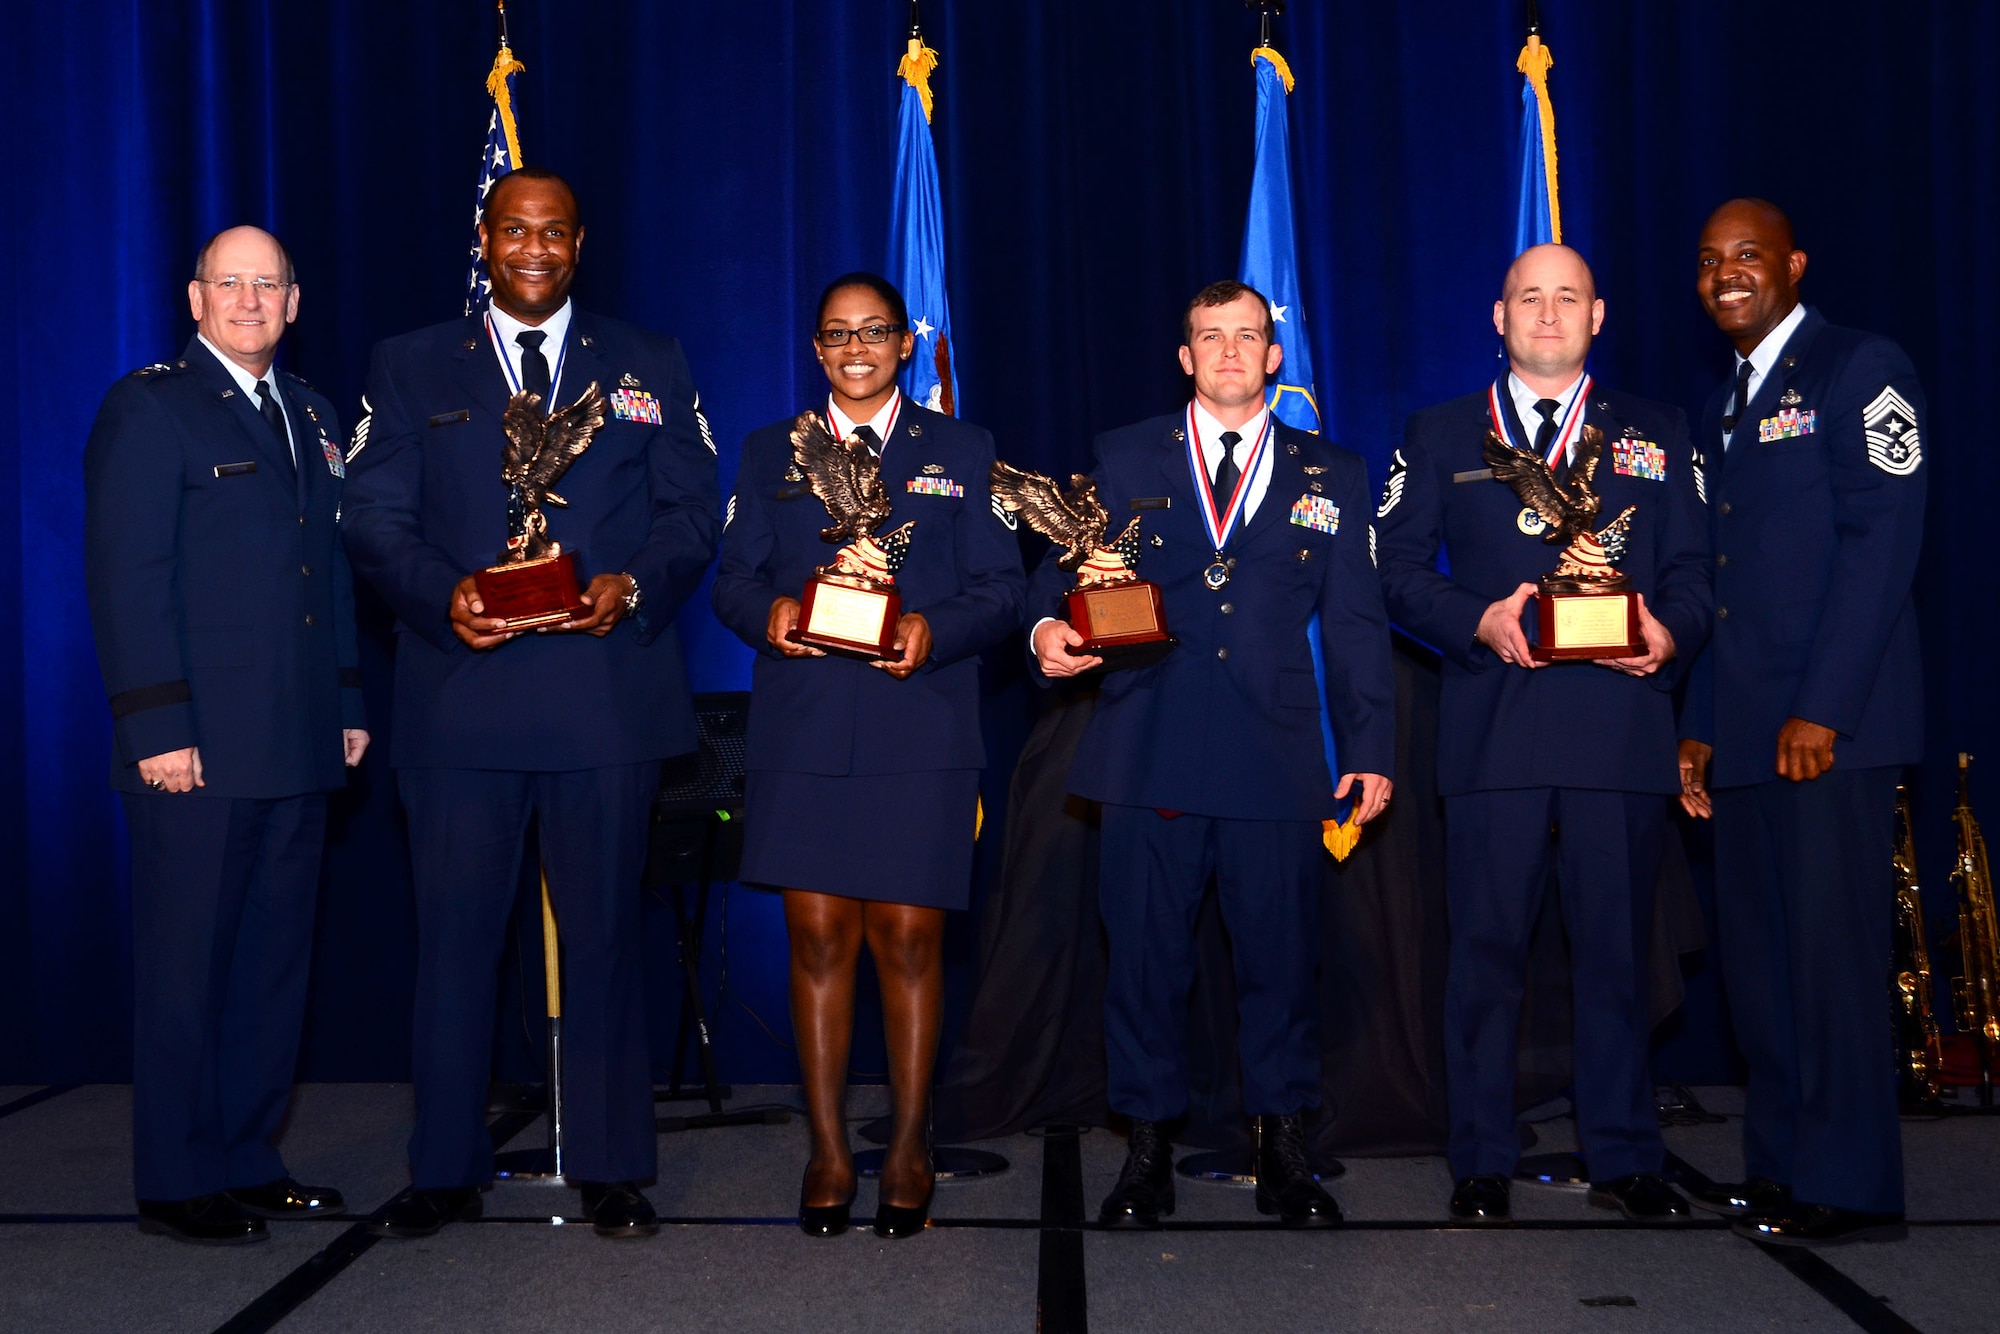 Air Force Reserve Command’s Outstanding Airman of the Year winners pose for a photo with Lt. Gen. James Jackson, AFRC commander, and Chief Master Sgt. Cameron Kirksey, AFRC command chief, during the AFRC OAY banquet at the Waverly Hotel in Atlanta, Ga., April 15, 2015. The AFRC banquet honored Citizen Airmen for the hard work and dedication. (U.S. Air Force photo/Brad Fallin)